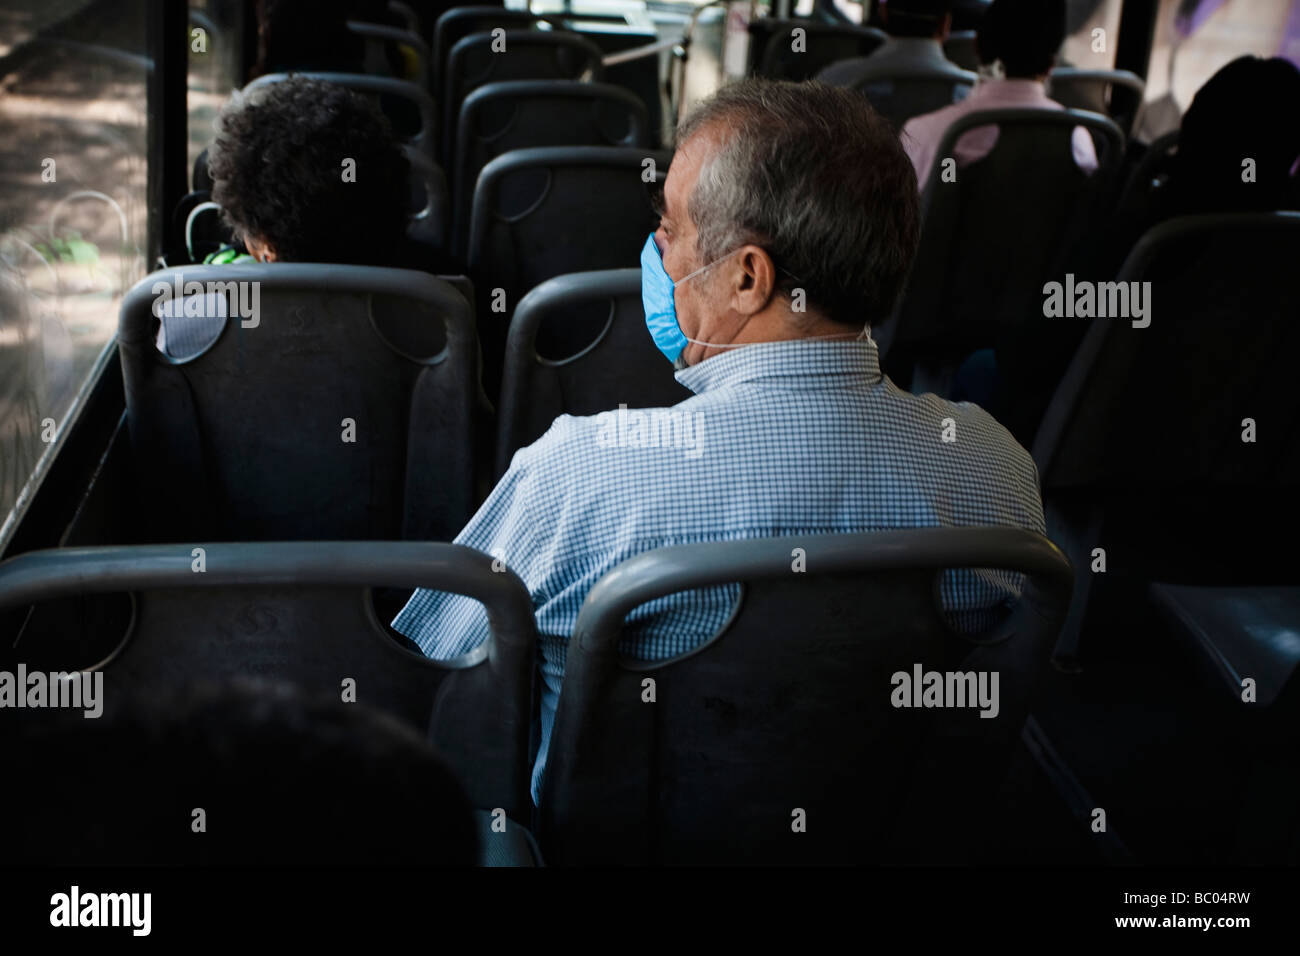 People inside a bus wearing masks during the swine flu epidemic in Mexico City, DF, Mexico. Stock Photo